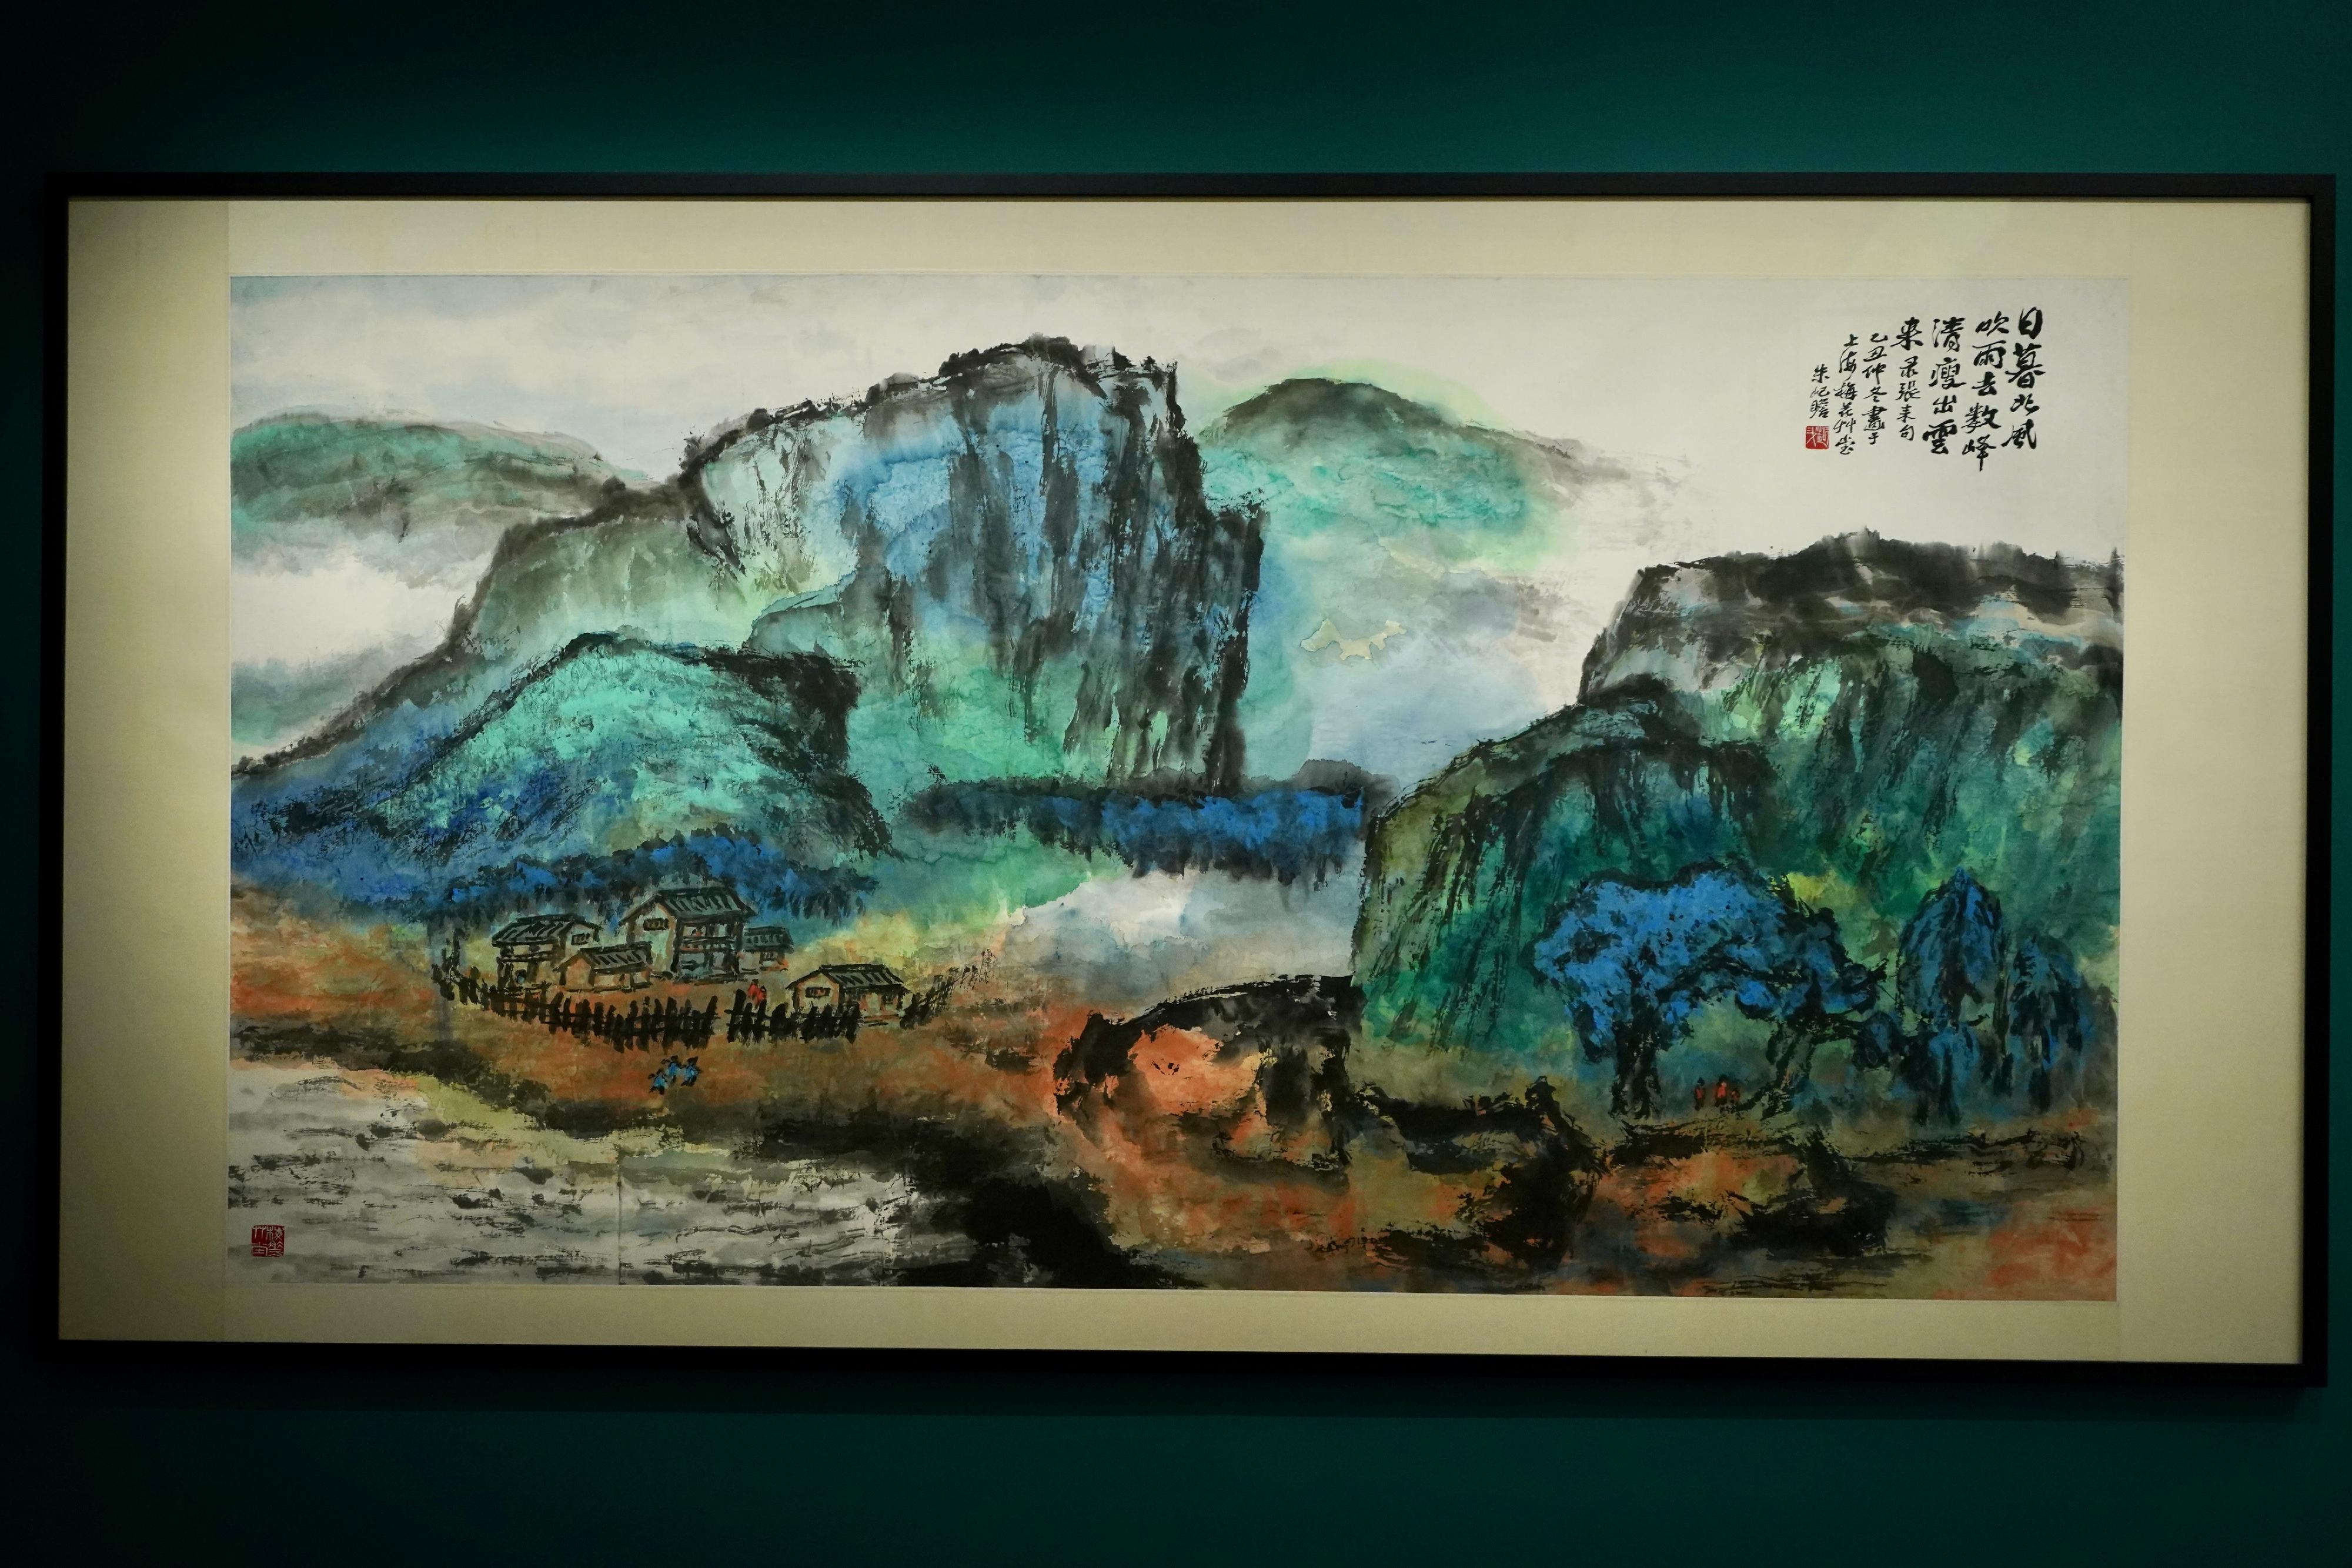 The Hong Kong Museum of Art will launch a new exhibition "Palette of a Centenarian: Selected Works of Zhu Qizhan from the Jingguanlou Collection", to showcase over 80 sets of paintings by Shanghai School Master Zhu Qizhan from different times in his life. Photo shows “Wind at dusk”.